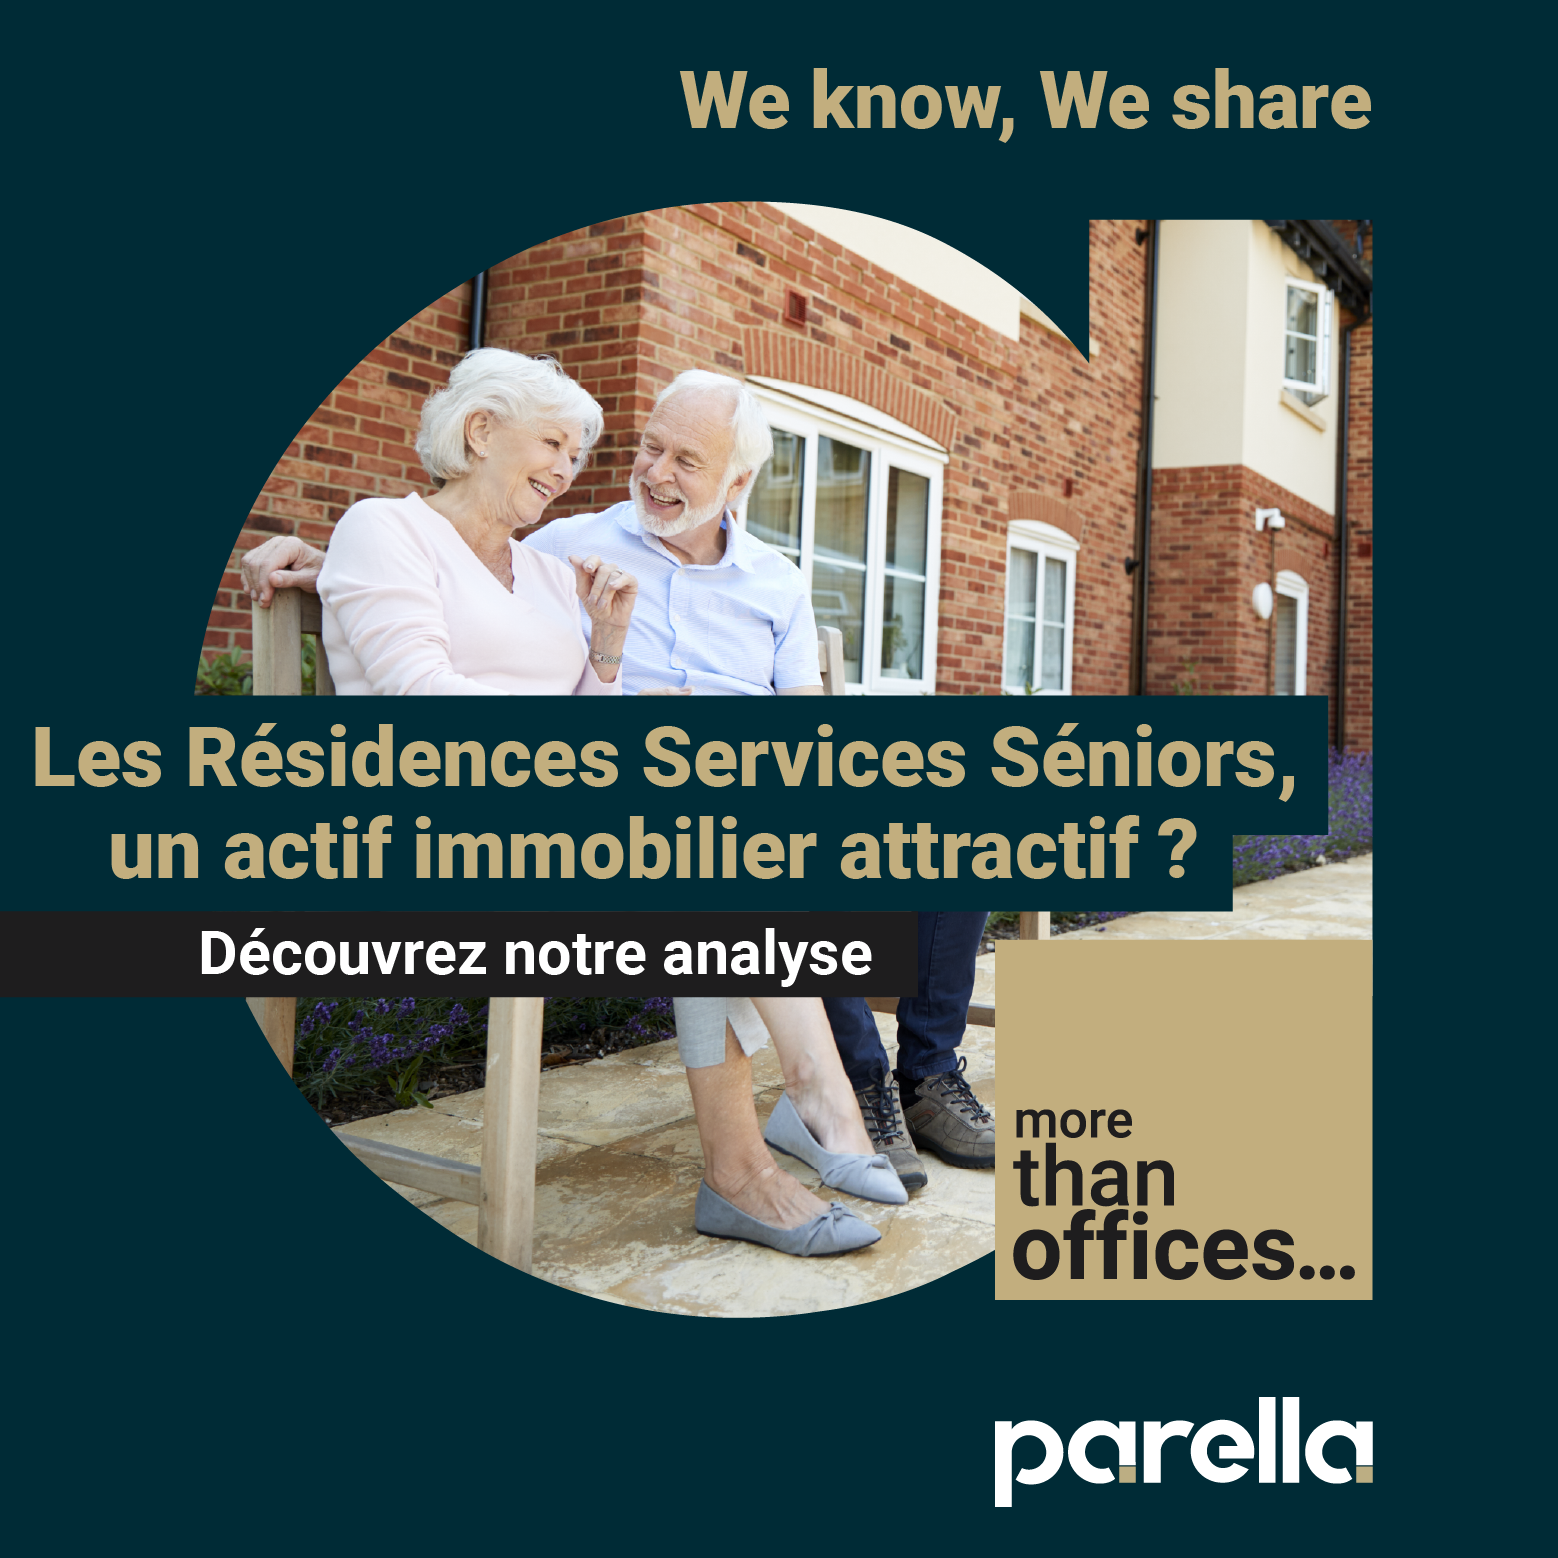 Senior Citizens Residences, an attractive real estate asset?